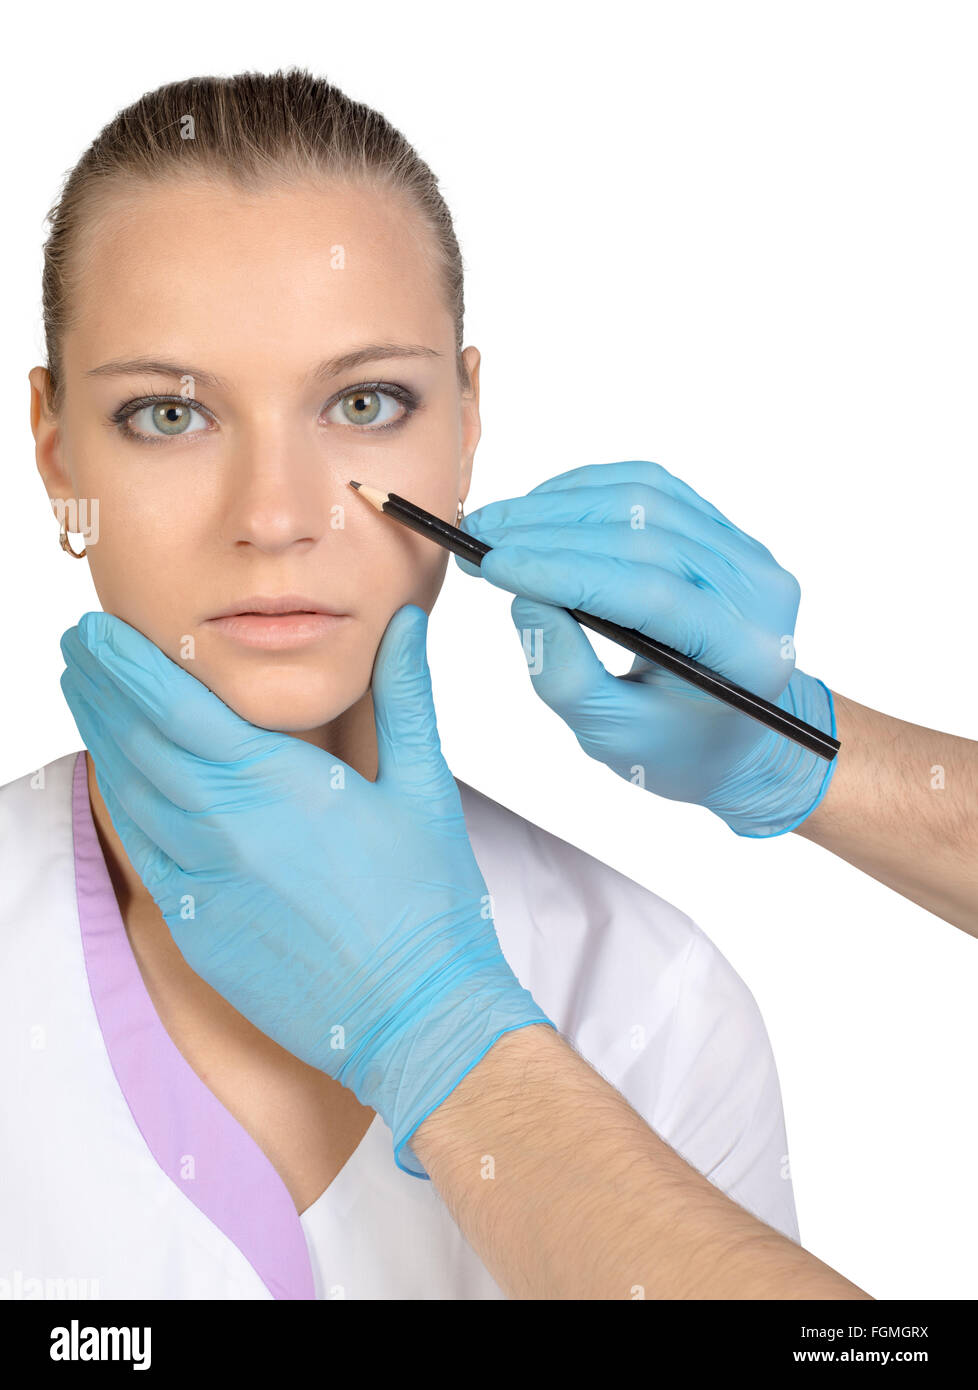 Beauty Woman face surgery making marks on close up portrait. Female model Stock Photo